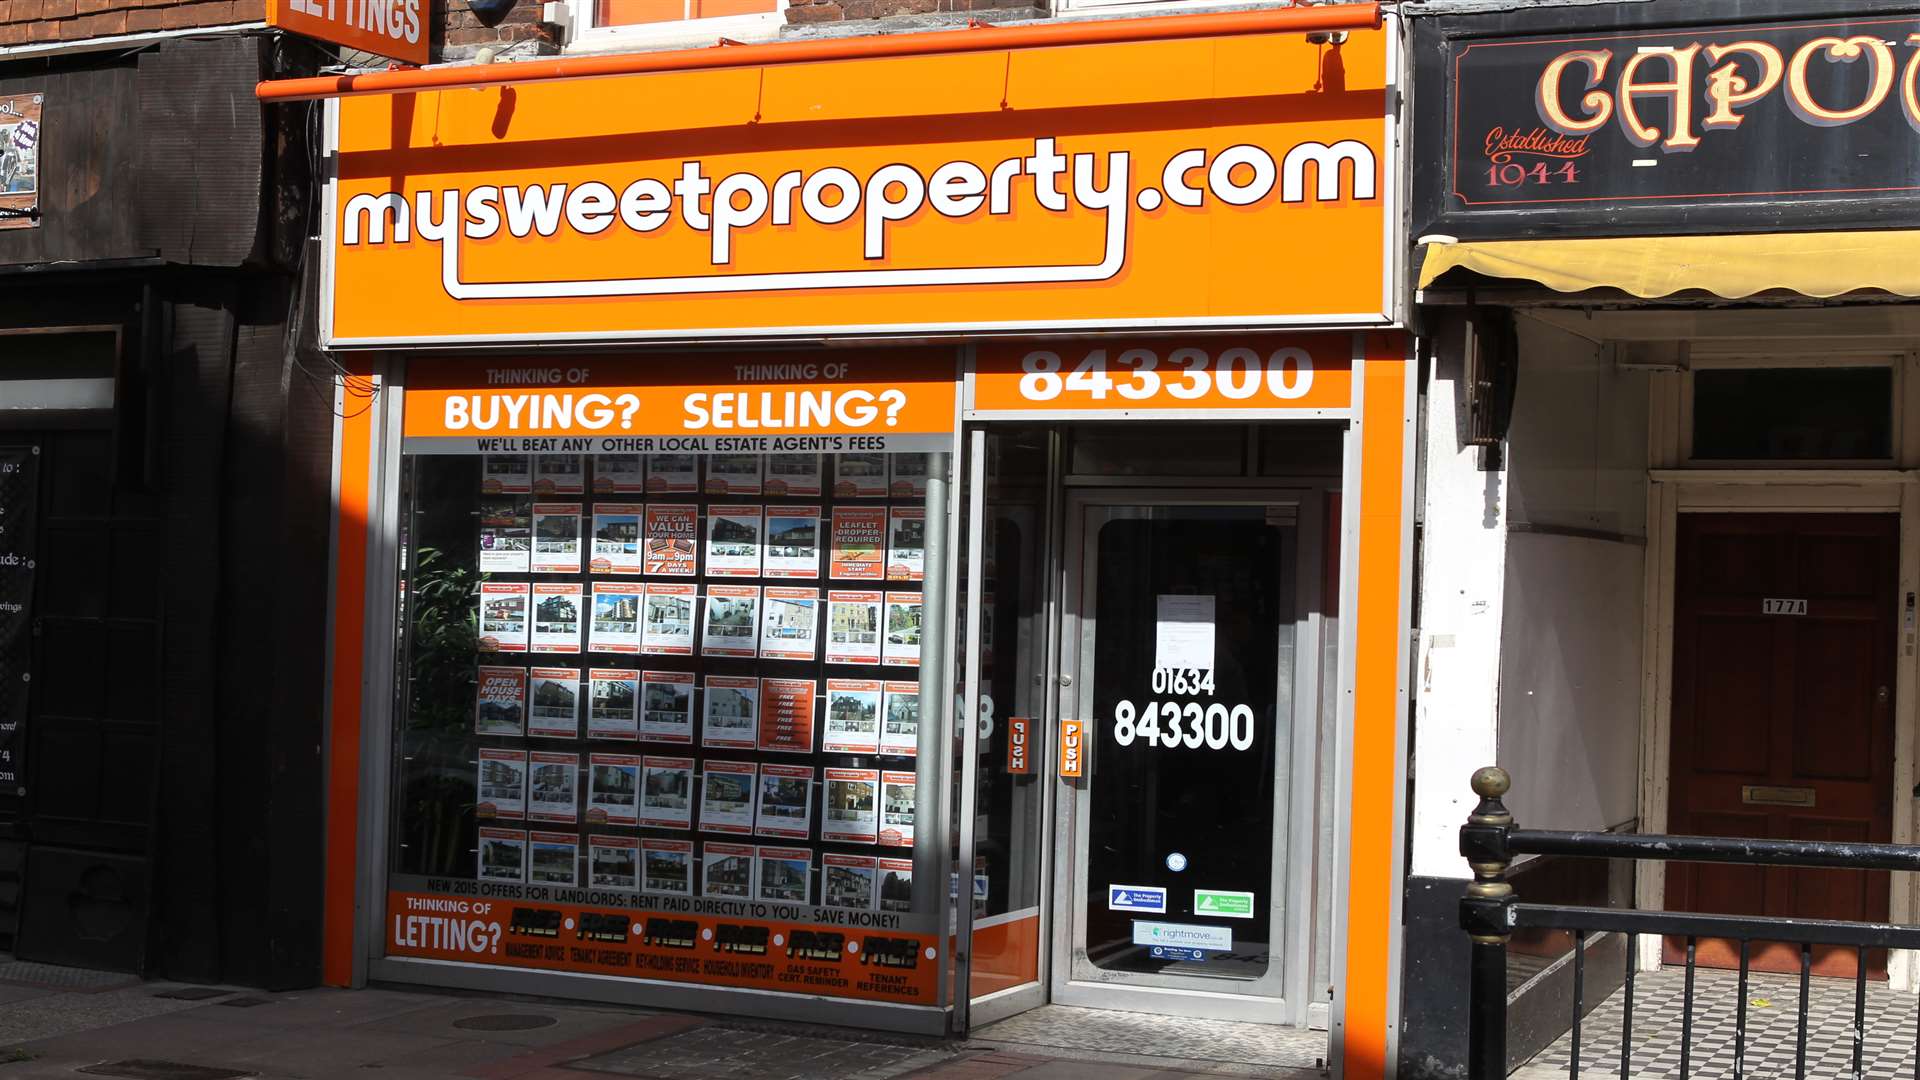 Sweet property services, 175 High Street, Rochester, has closed